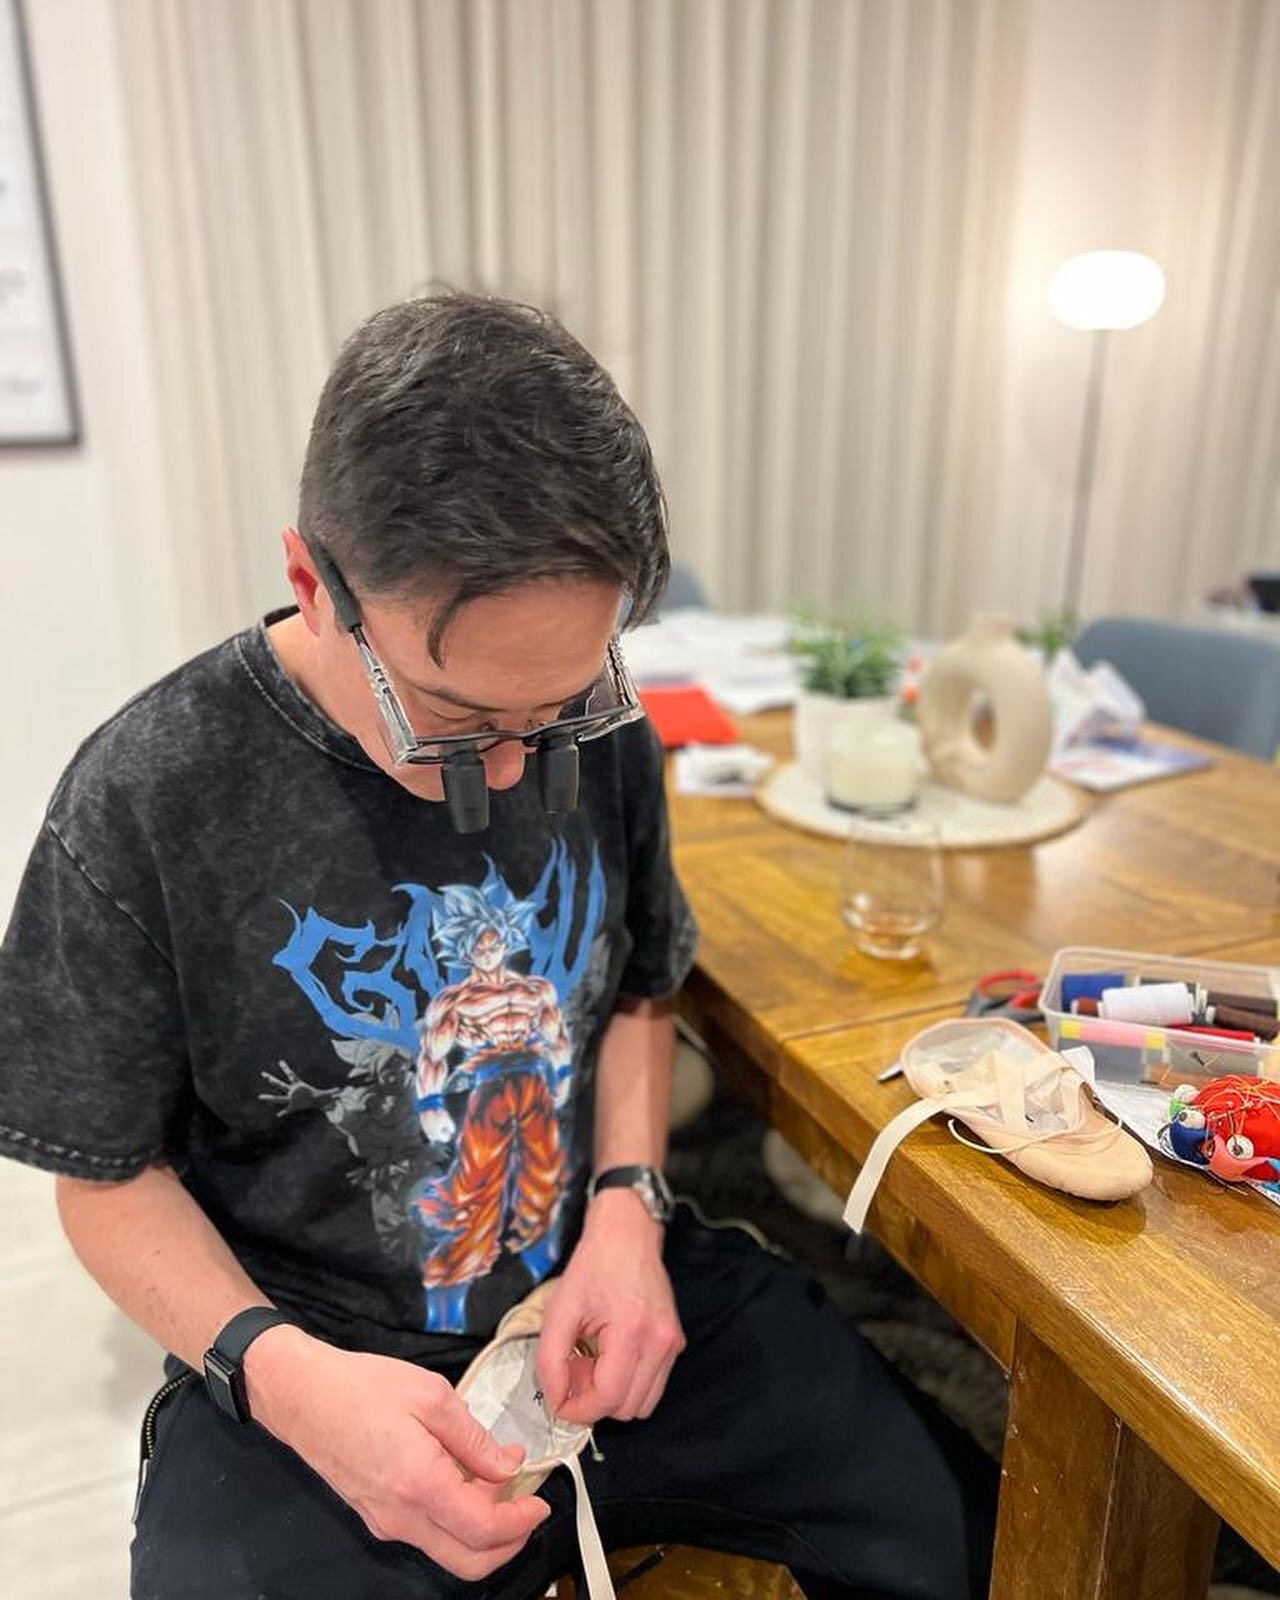 Ballet Exam tomorrow. New ribbons required. 

#sewing #surgery #loupes #designsforvision #ballet #cardiacsurgery #cardiothoracicsurgery #dadlikeasurgeon